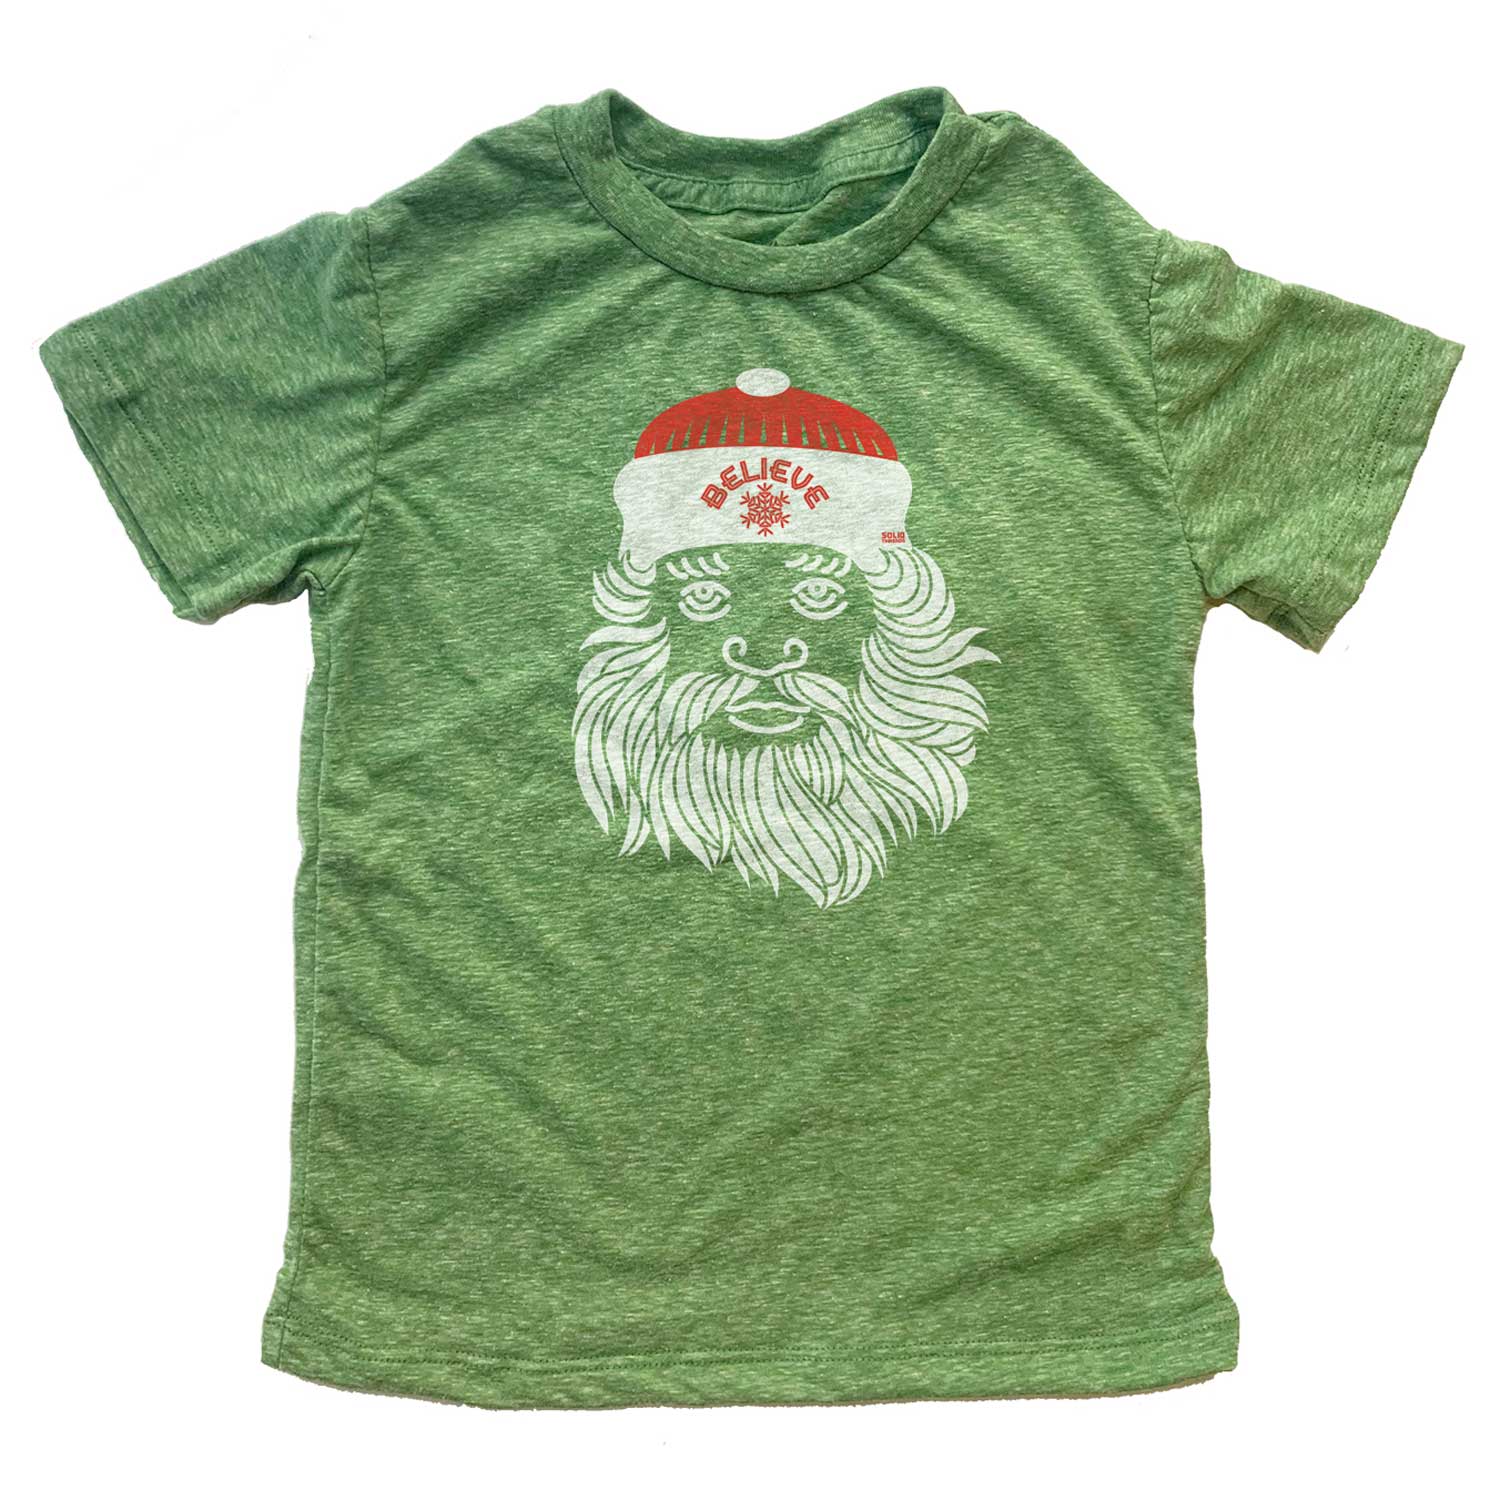 Kids Believe In Santa Cool Graphic T-Shirt | Retro Christmas Spirit Triblend Tee | Solid Threads